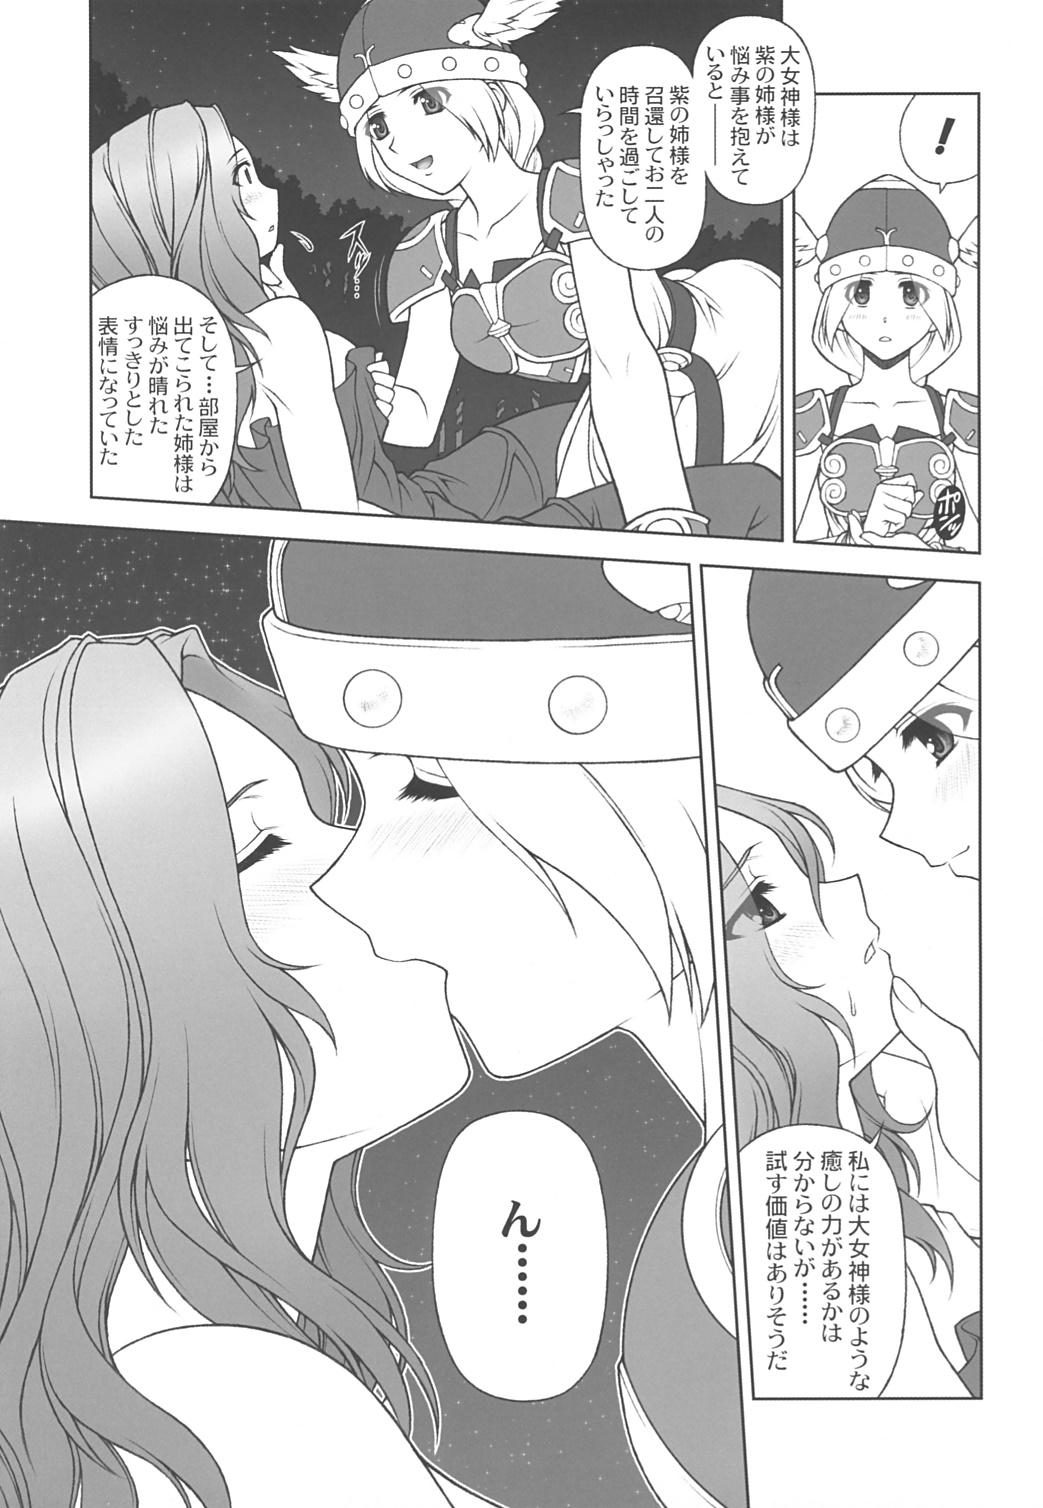 Argentina THE EXPERIENCE OF WALKURE - Valkyrie no bouken Hairy Sexy - Page 6